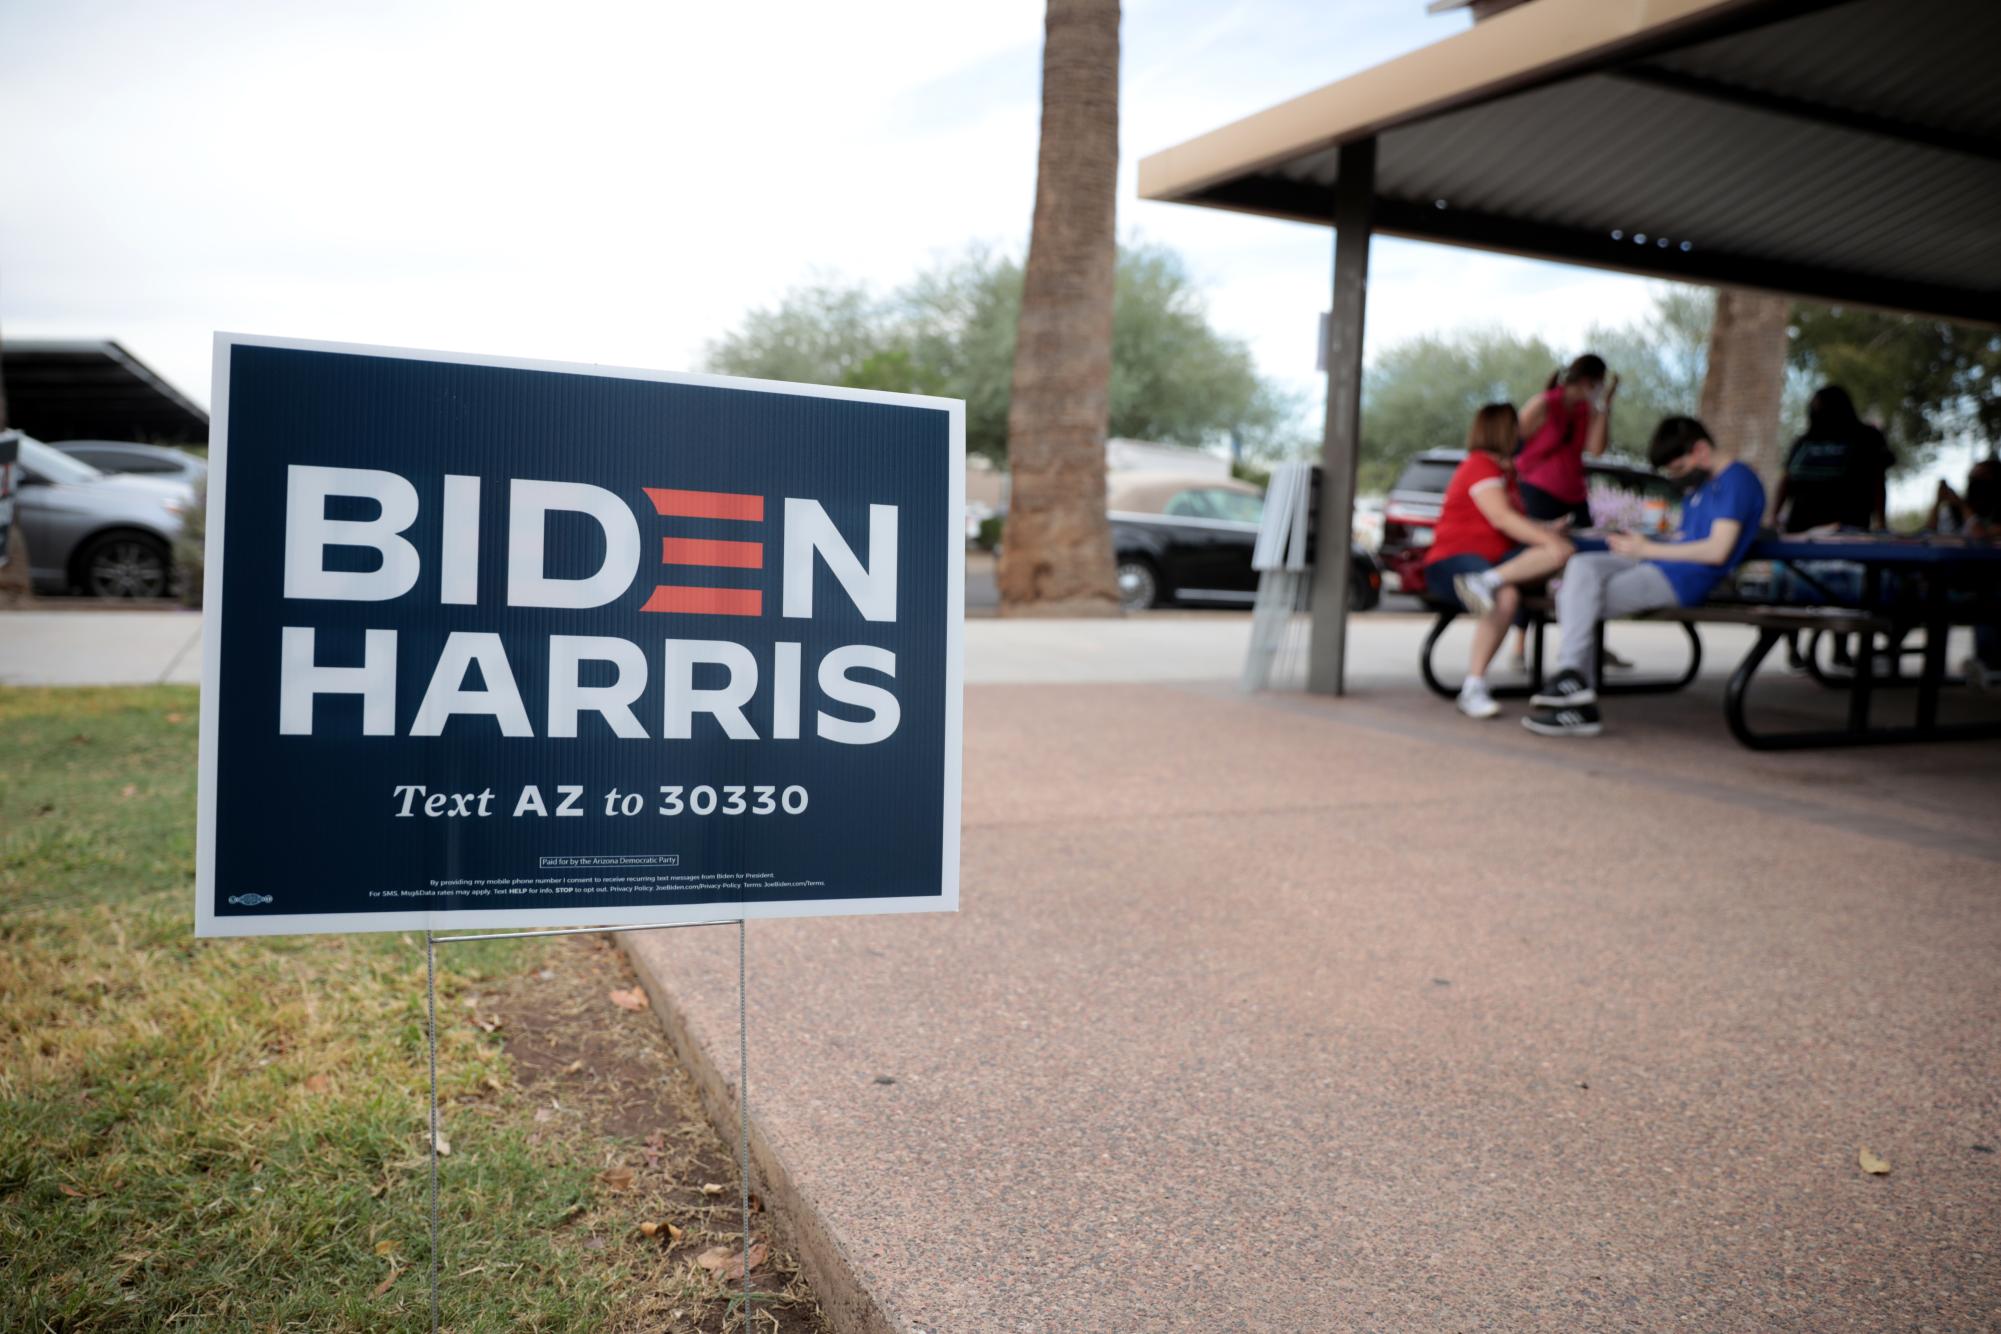 A Biden sign in Arizona just prior to the 2020 presidential election.